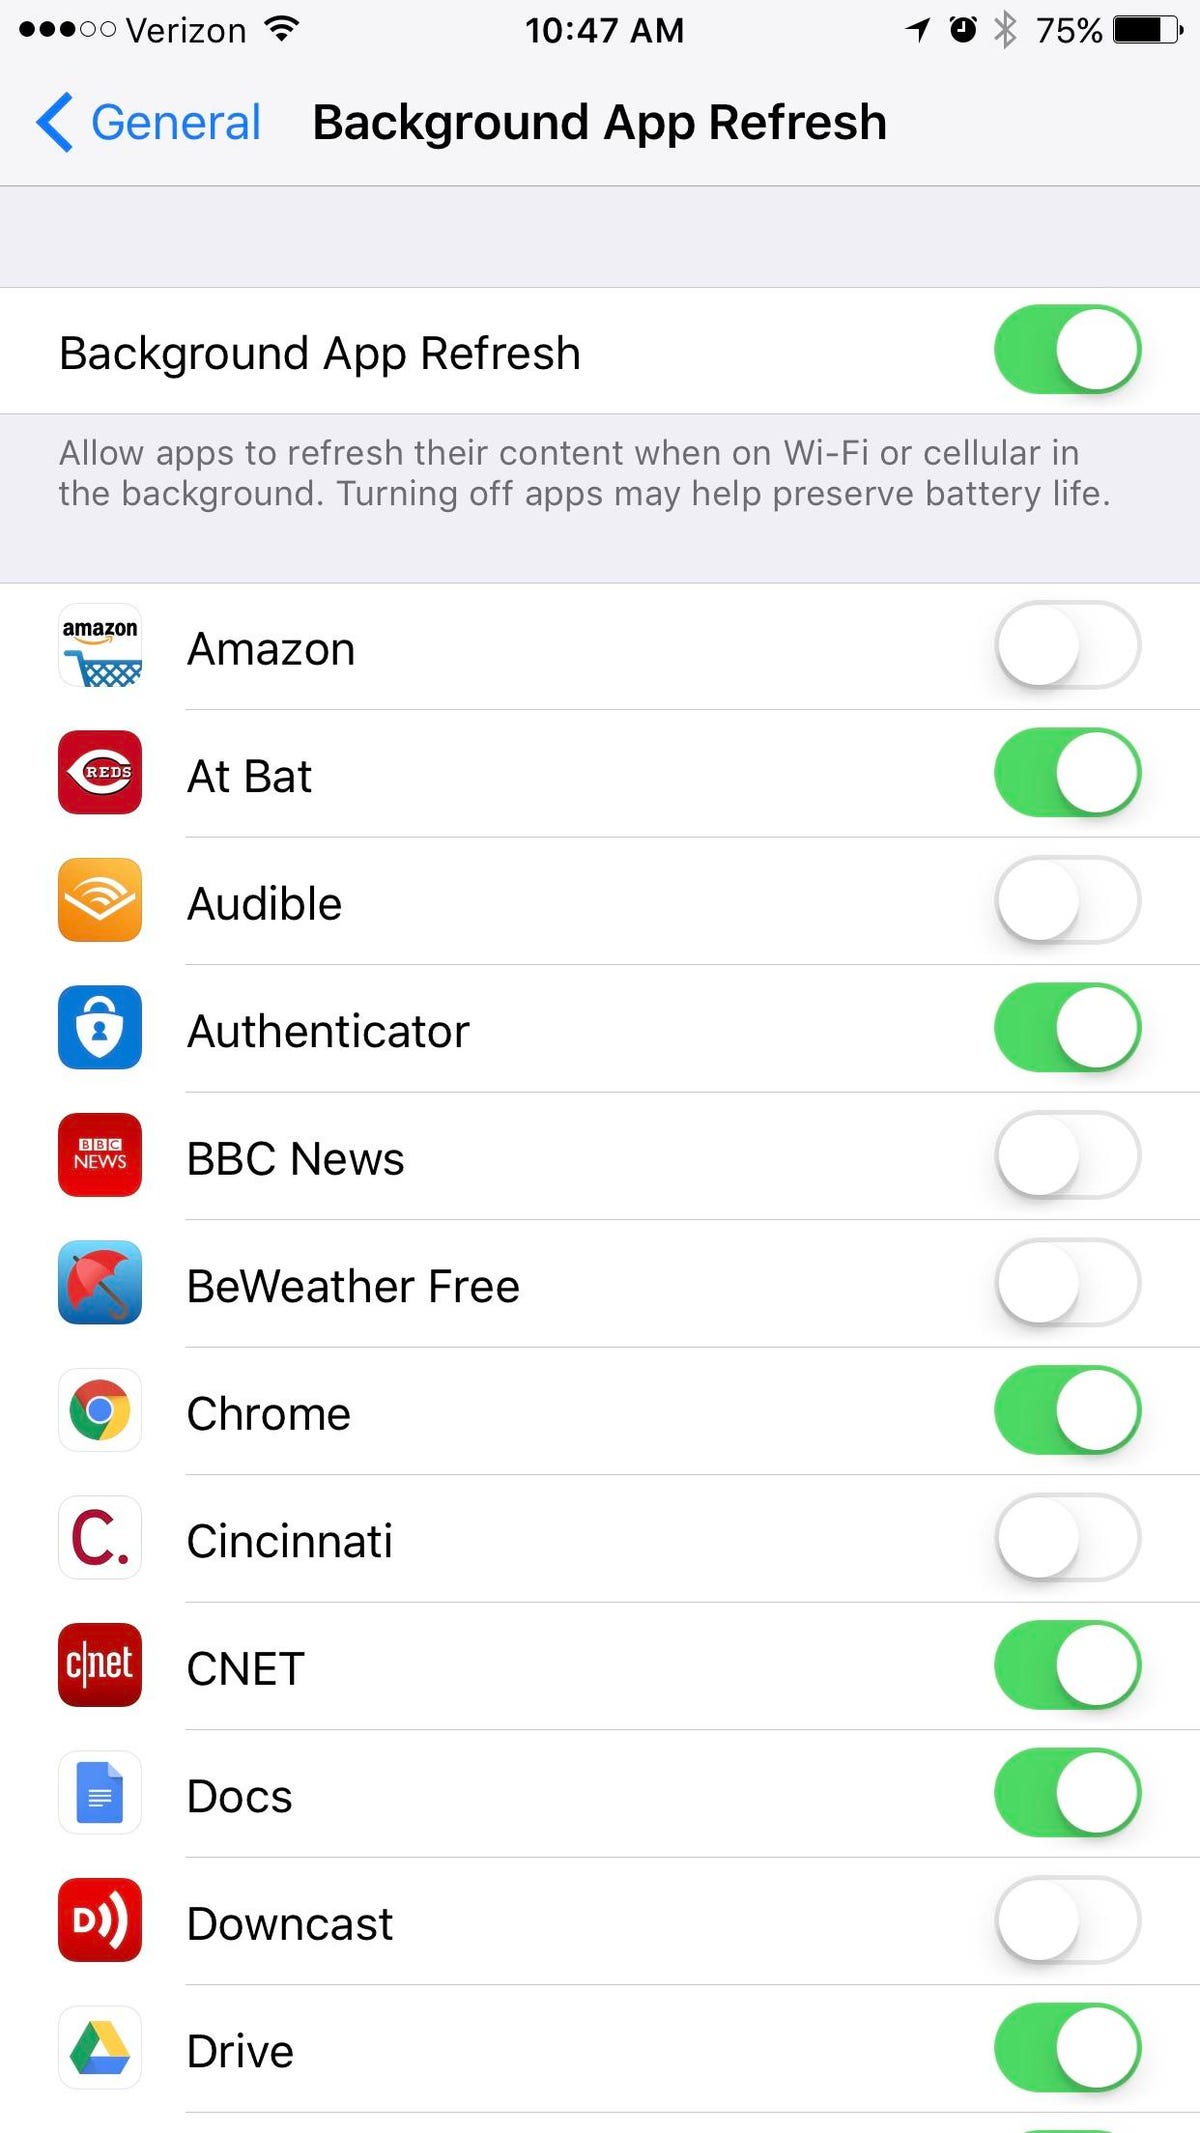 7 ways to seriously cut back on iPhone data usage - CNET